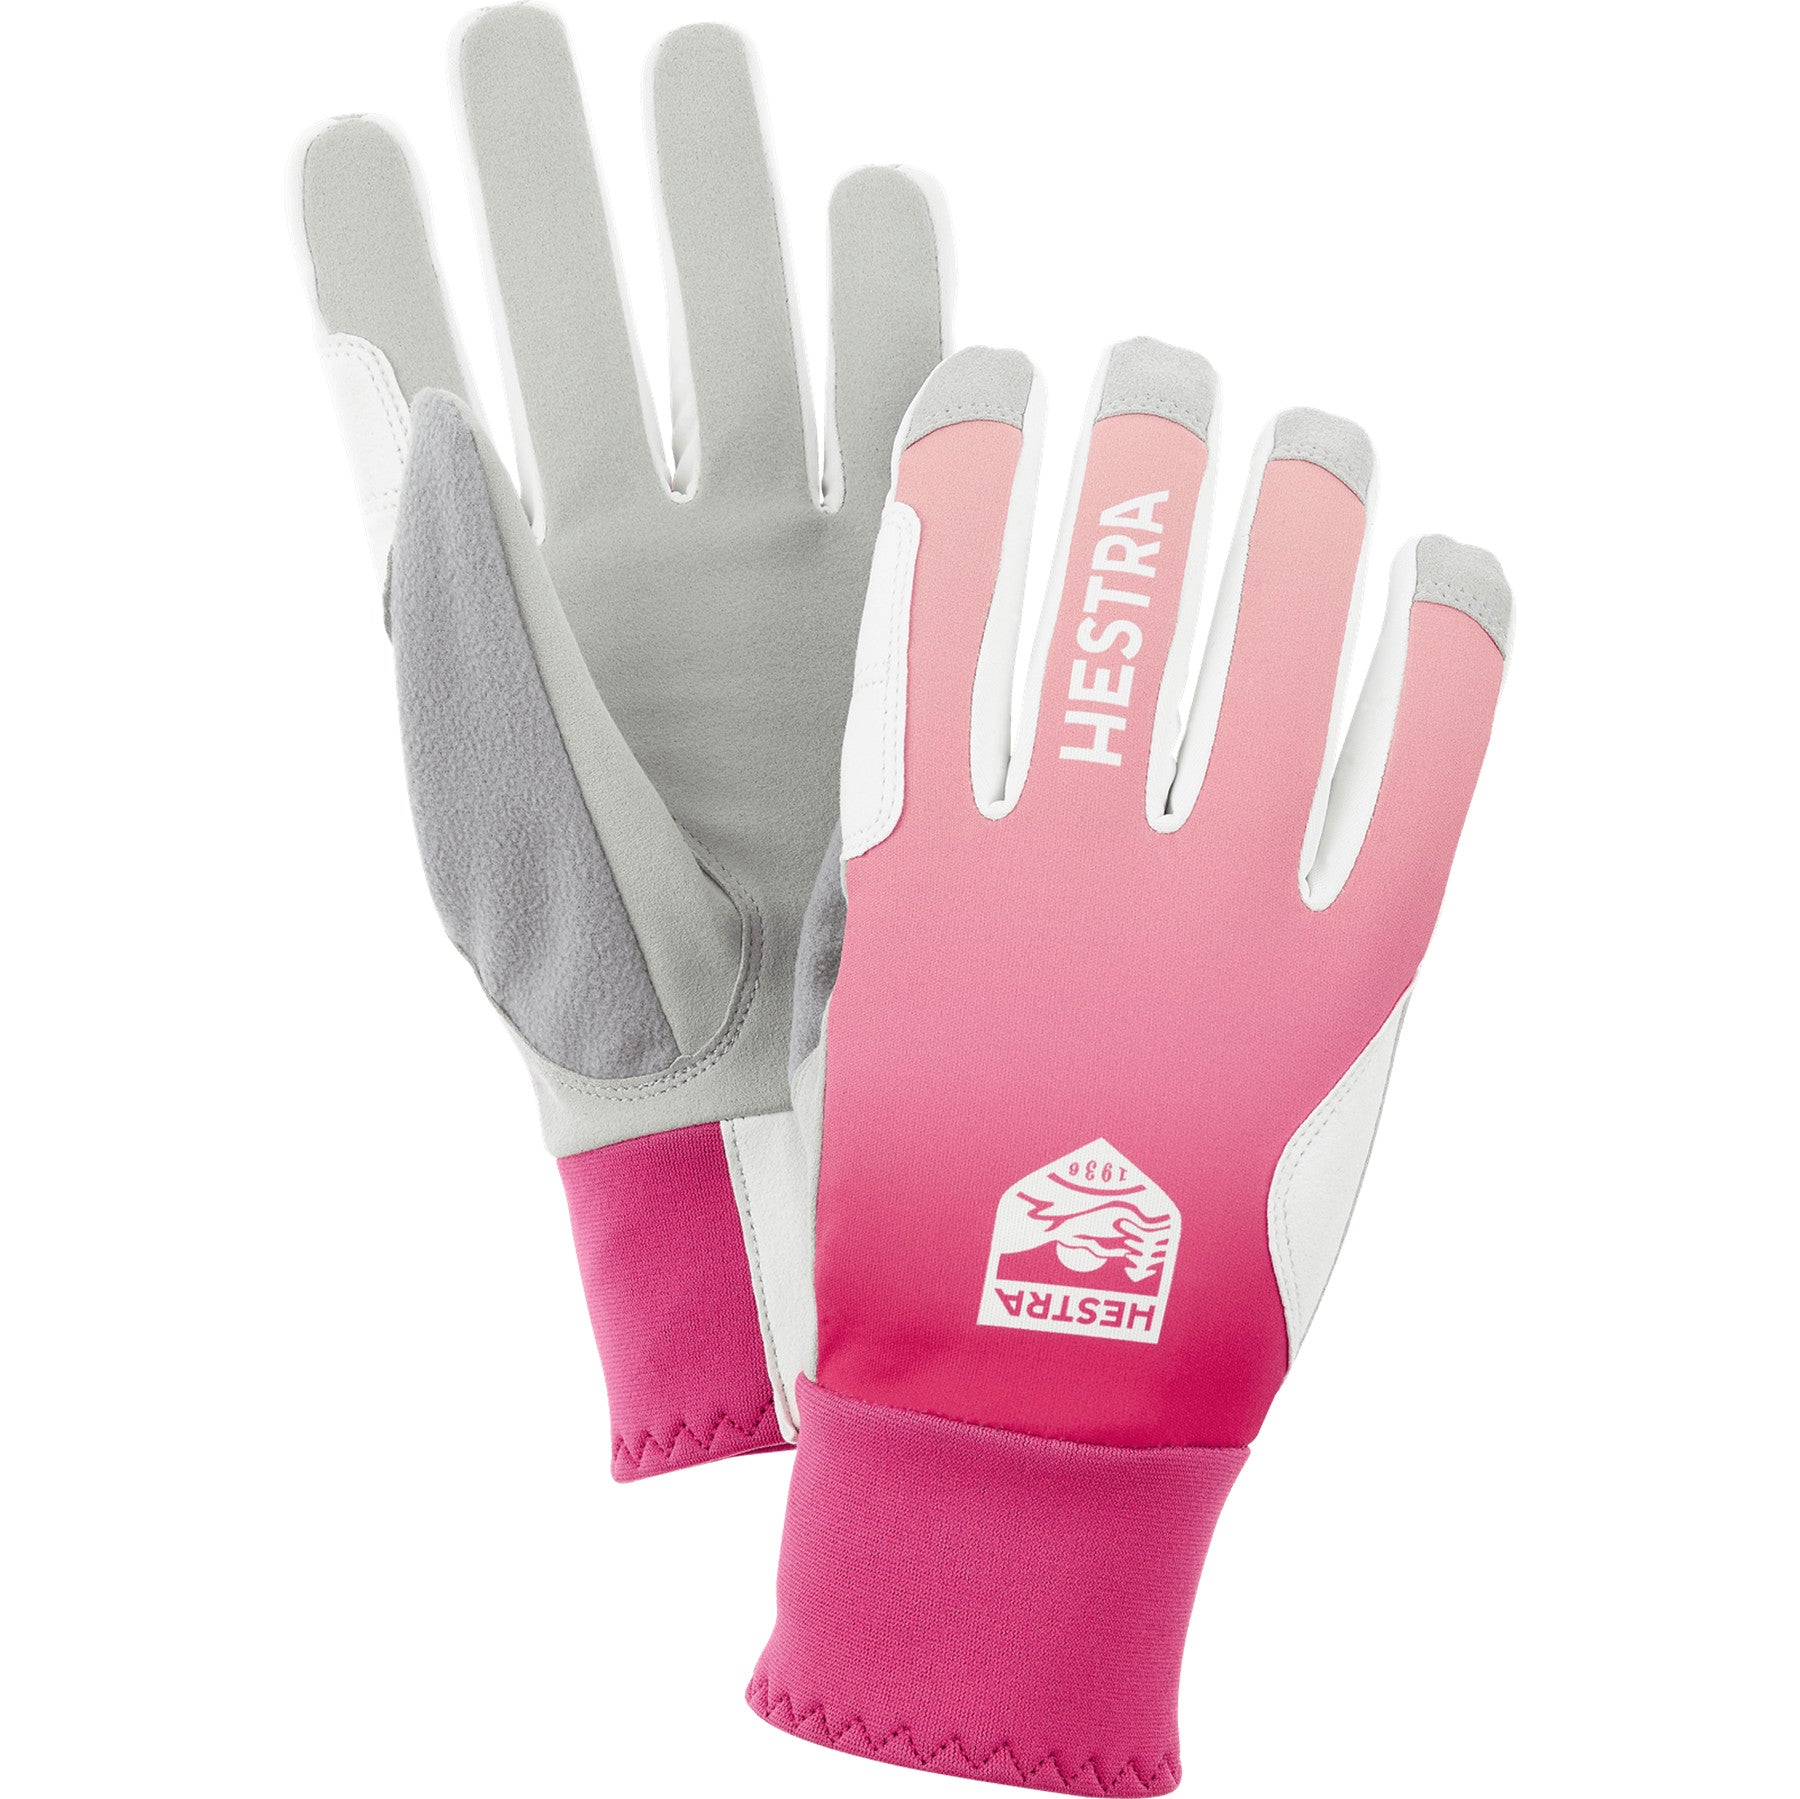 Hestra XC Race Fit Glove - 0